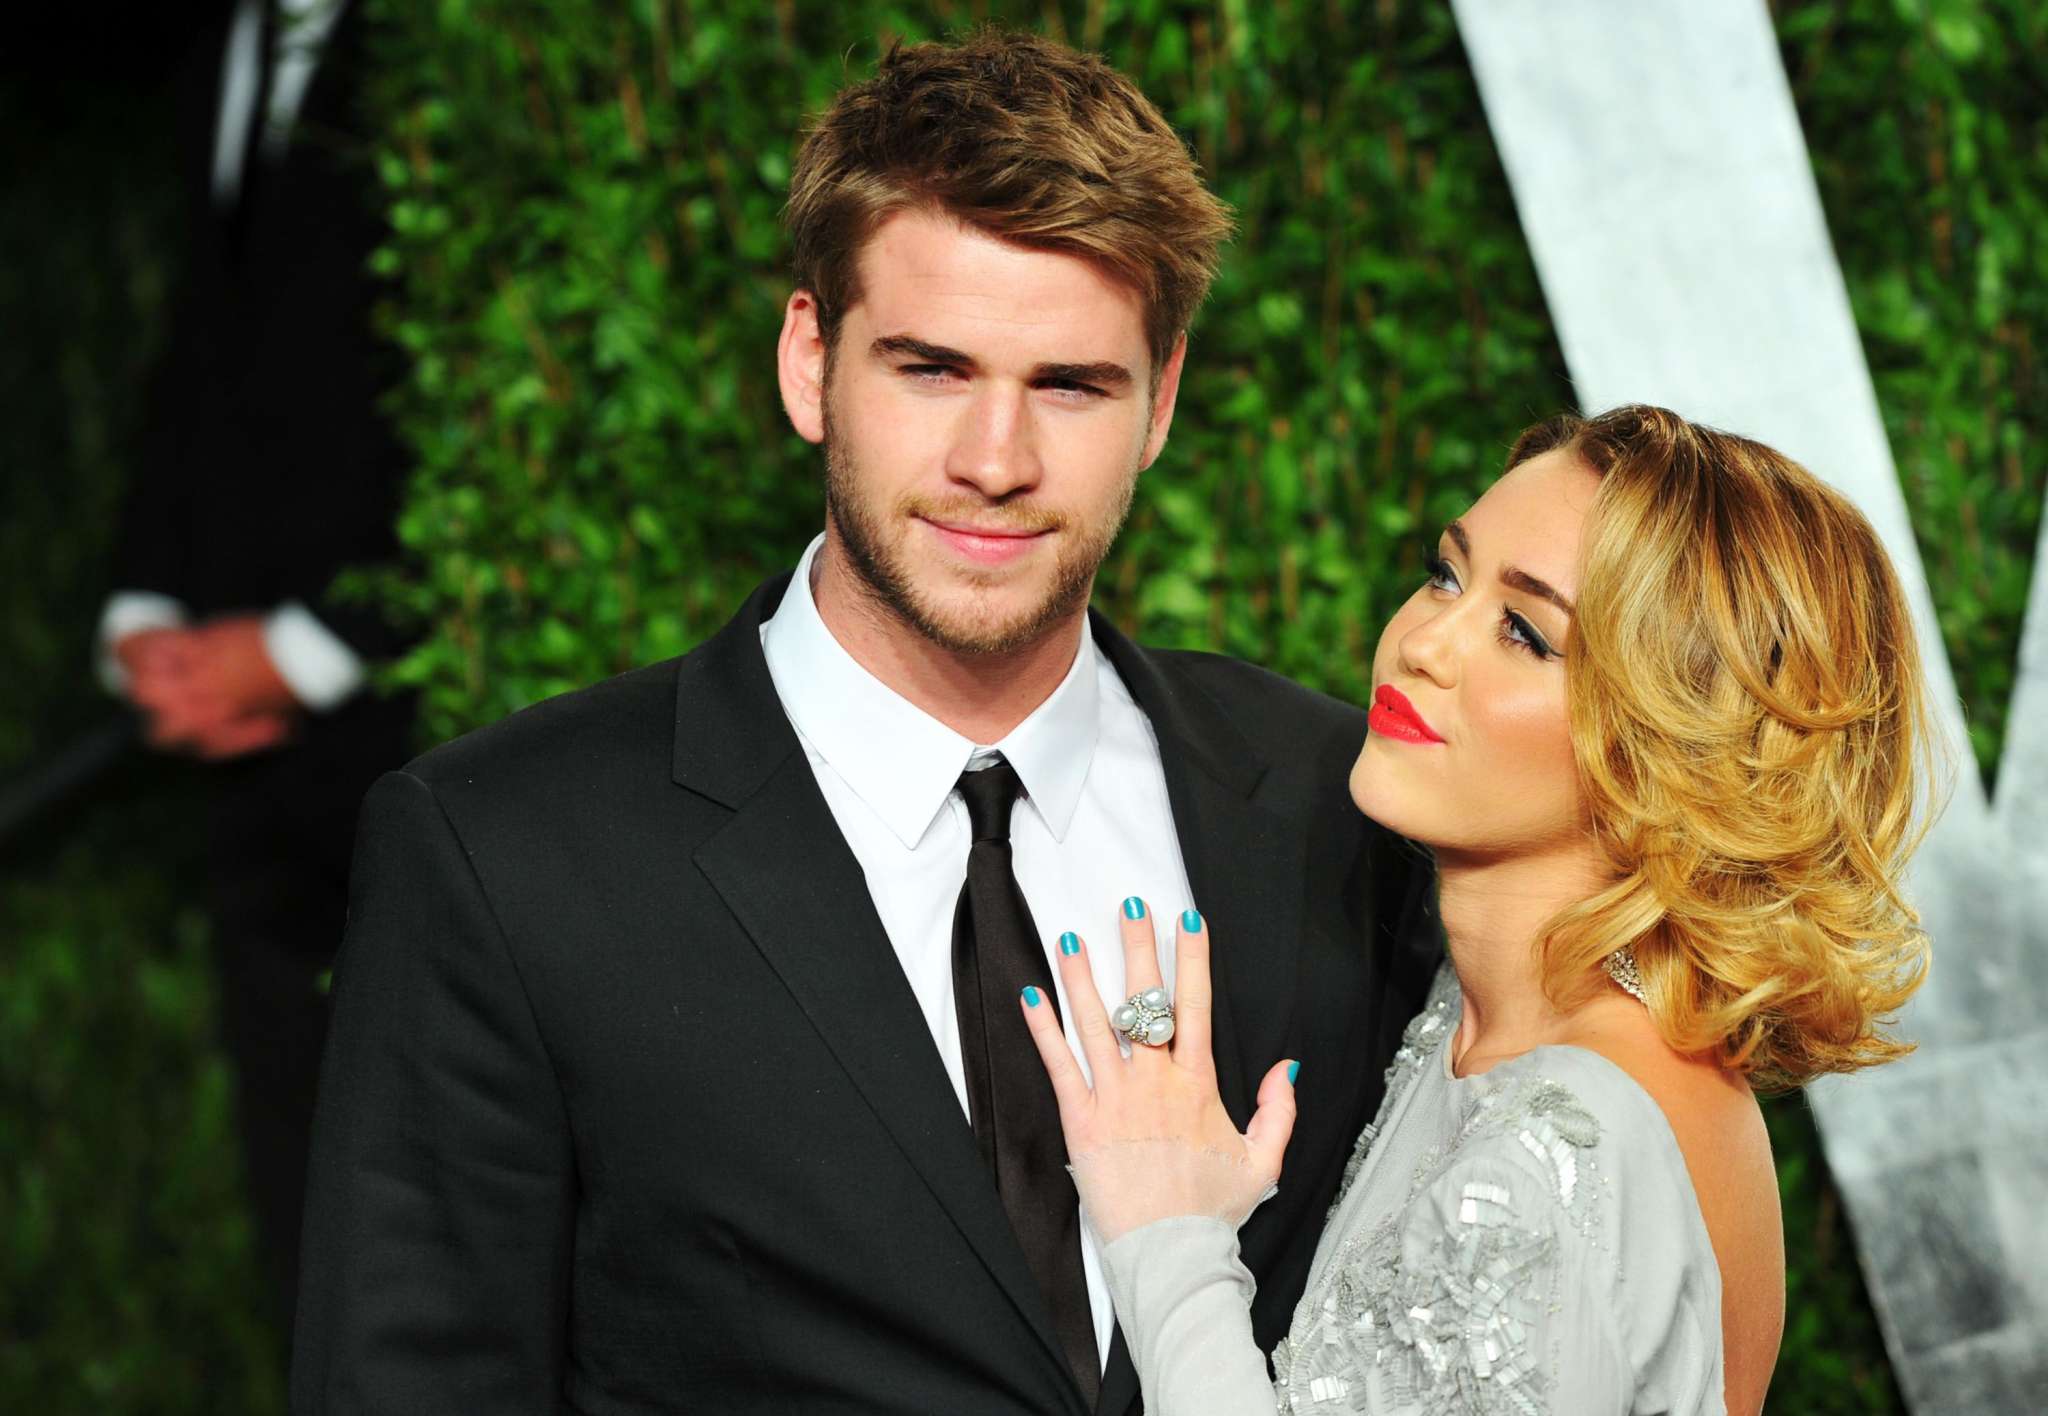 Miley Cyrus Confirms Marriage With Liam Hemsworth Shares Stunning